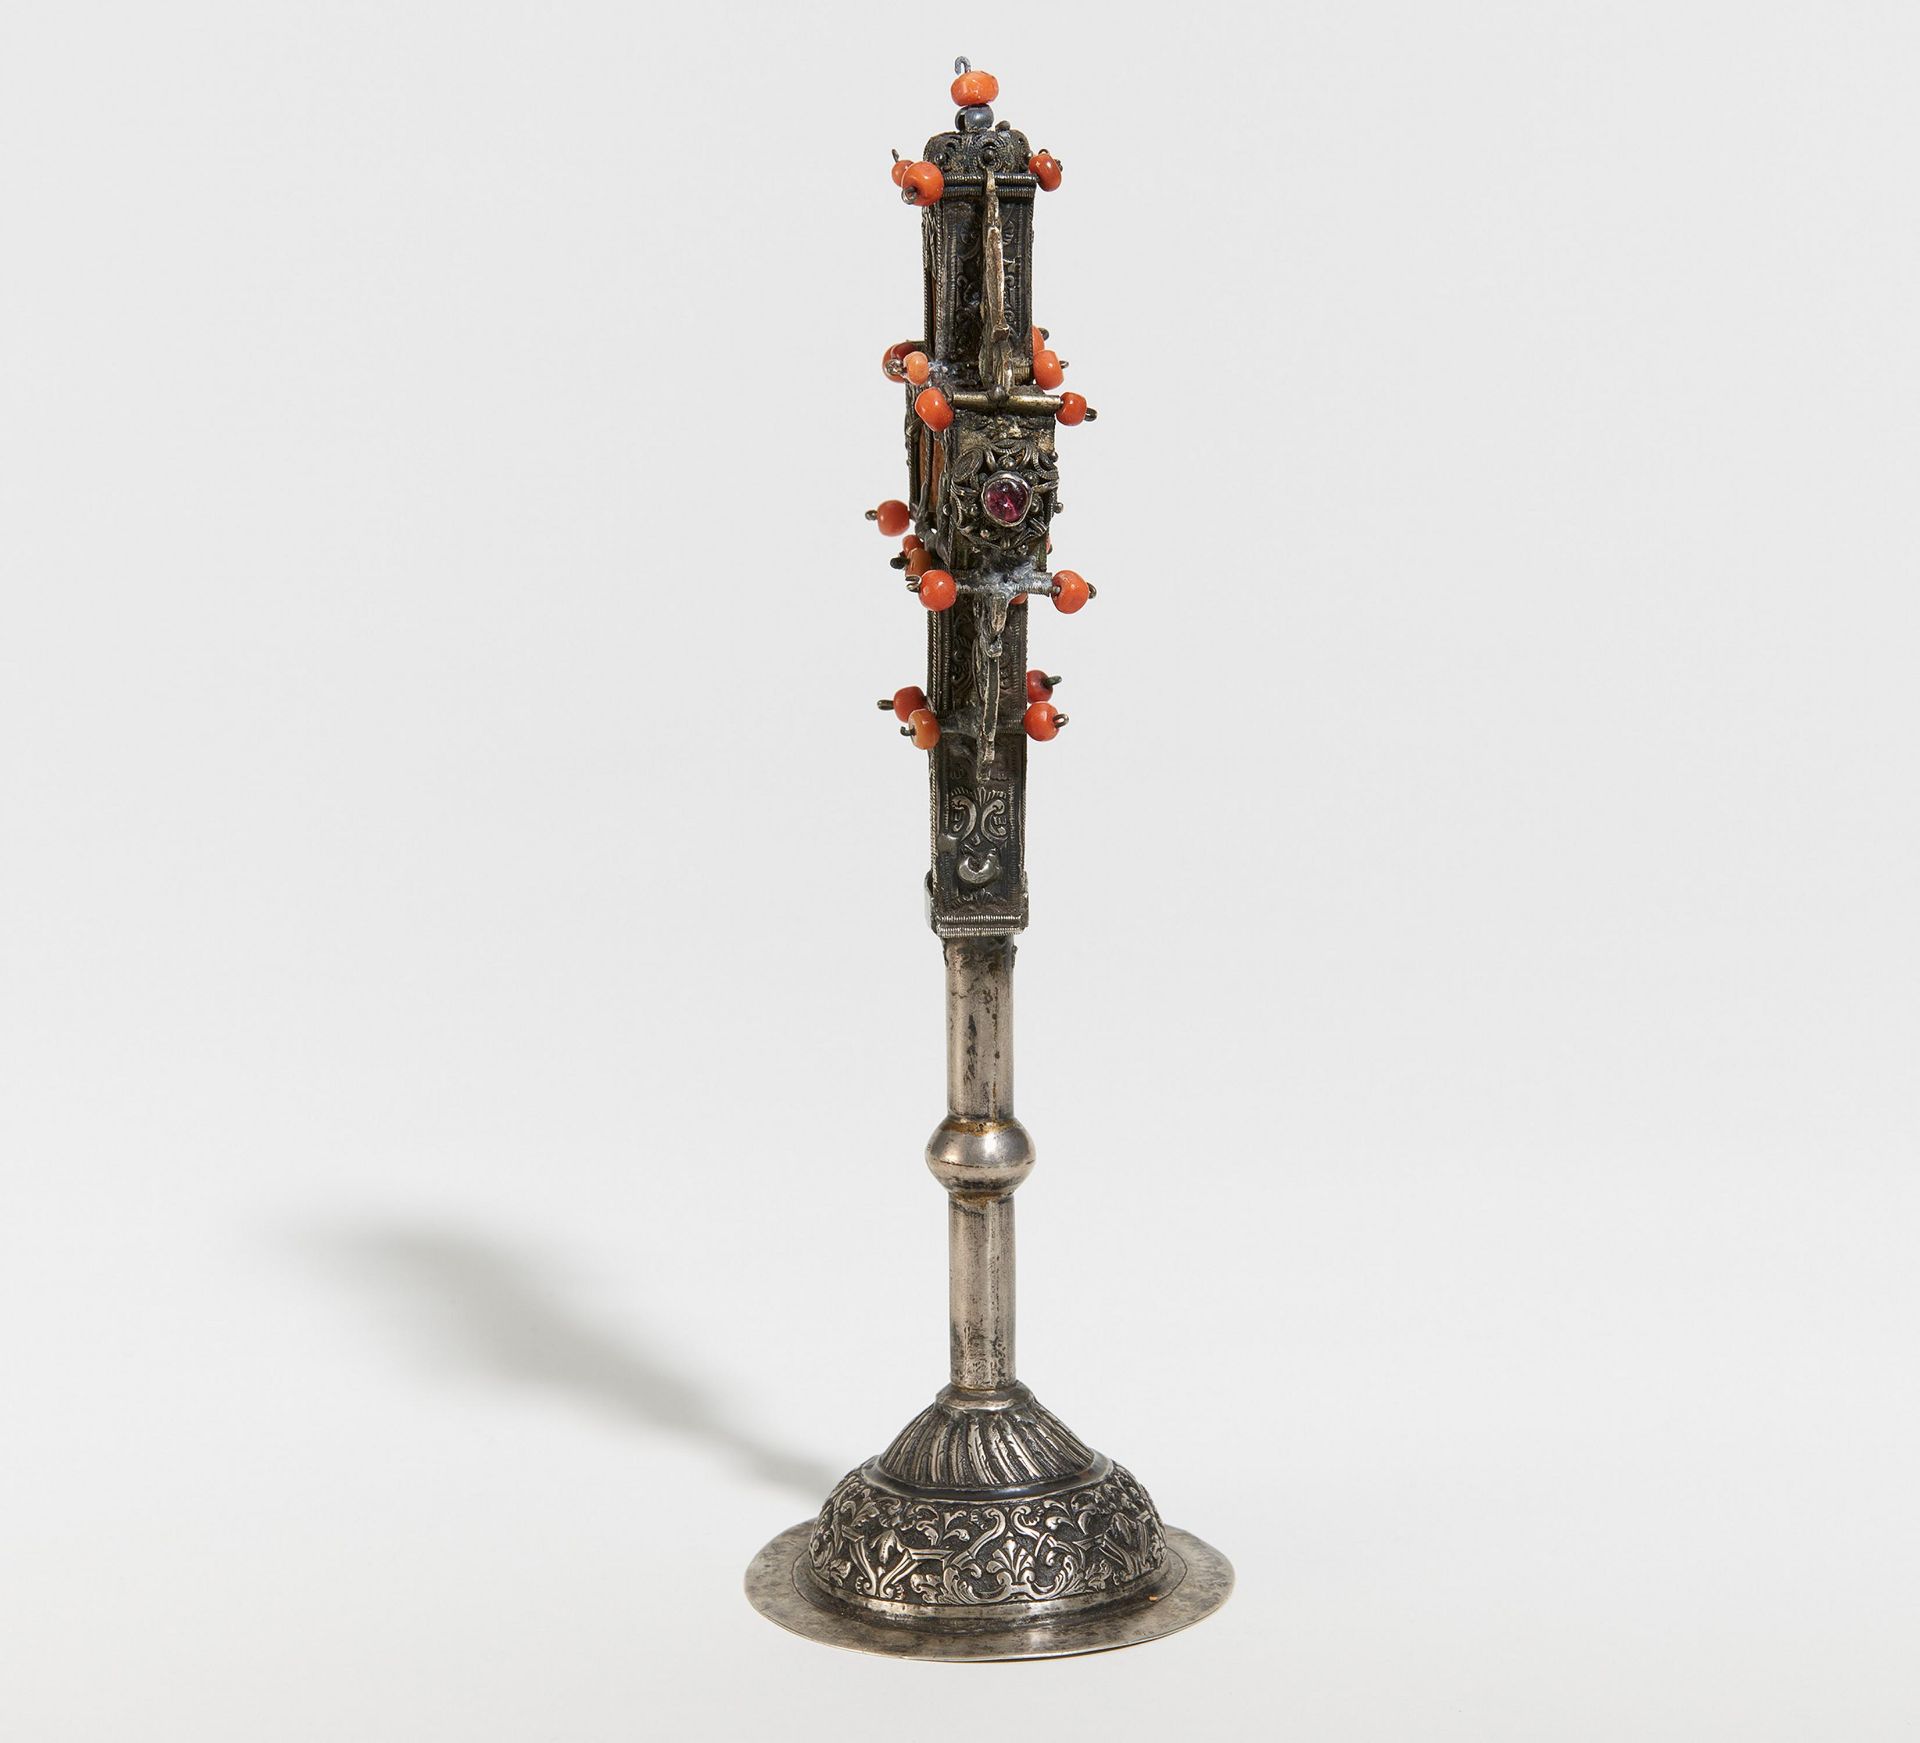 SMALL TABLE CROSS MADE OF SILVER, CORAL AND CEDAR WOOD. Mount Athos. Date: 18th century. - Bild 3 aus 5